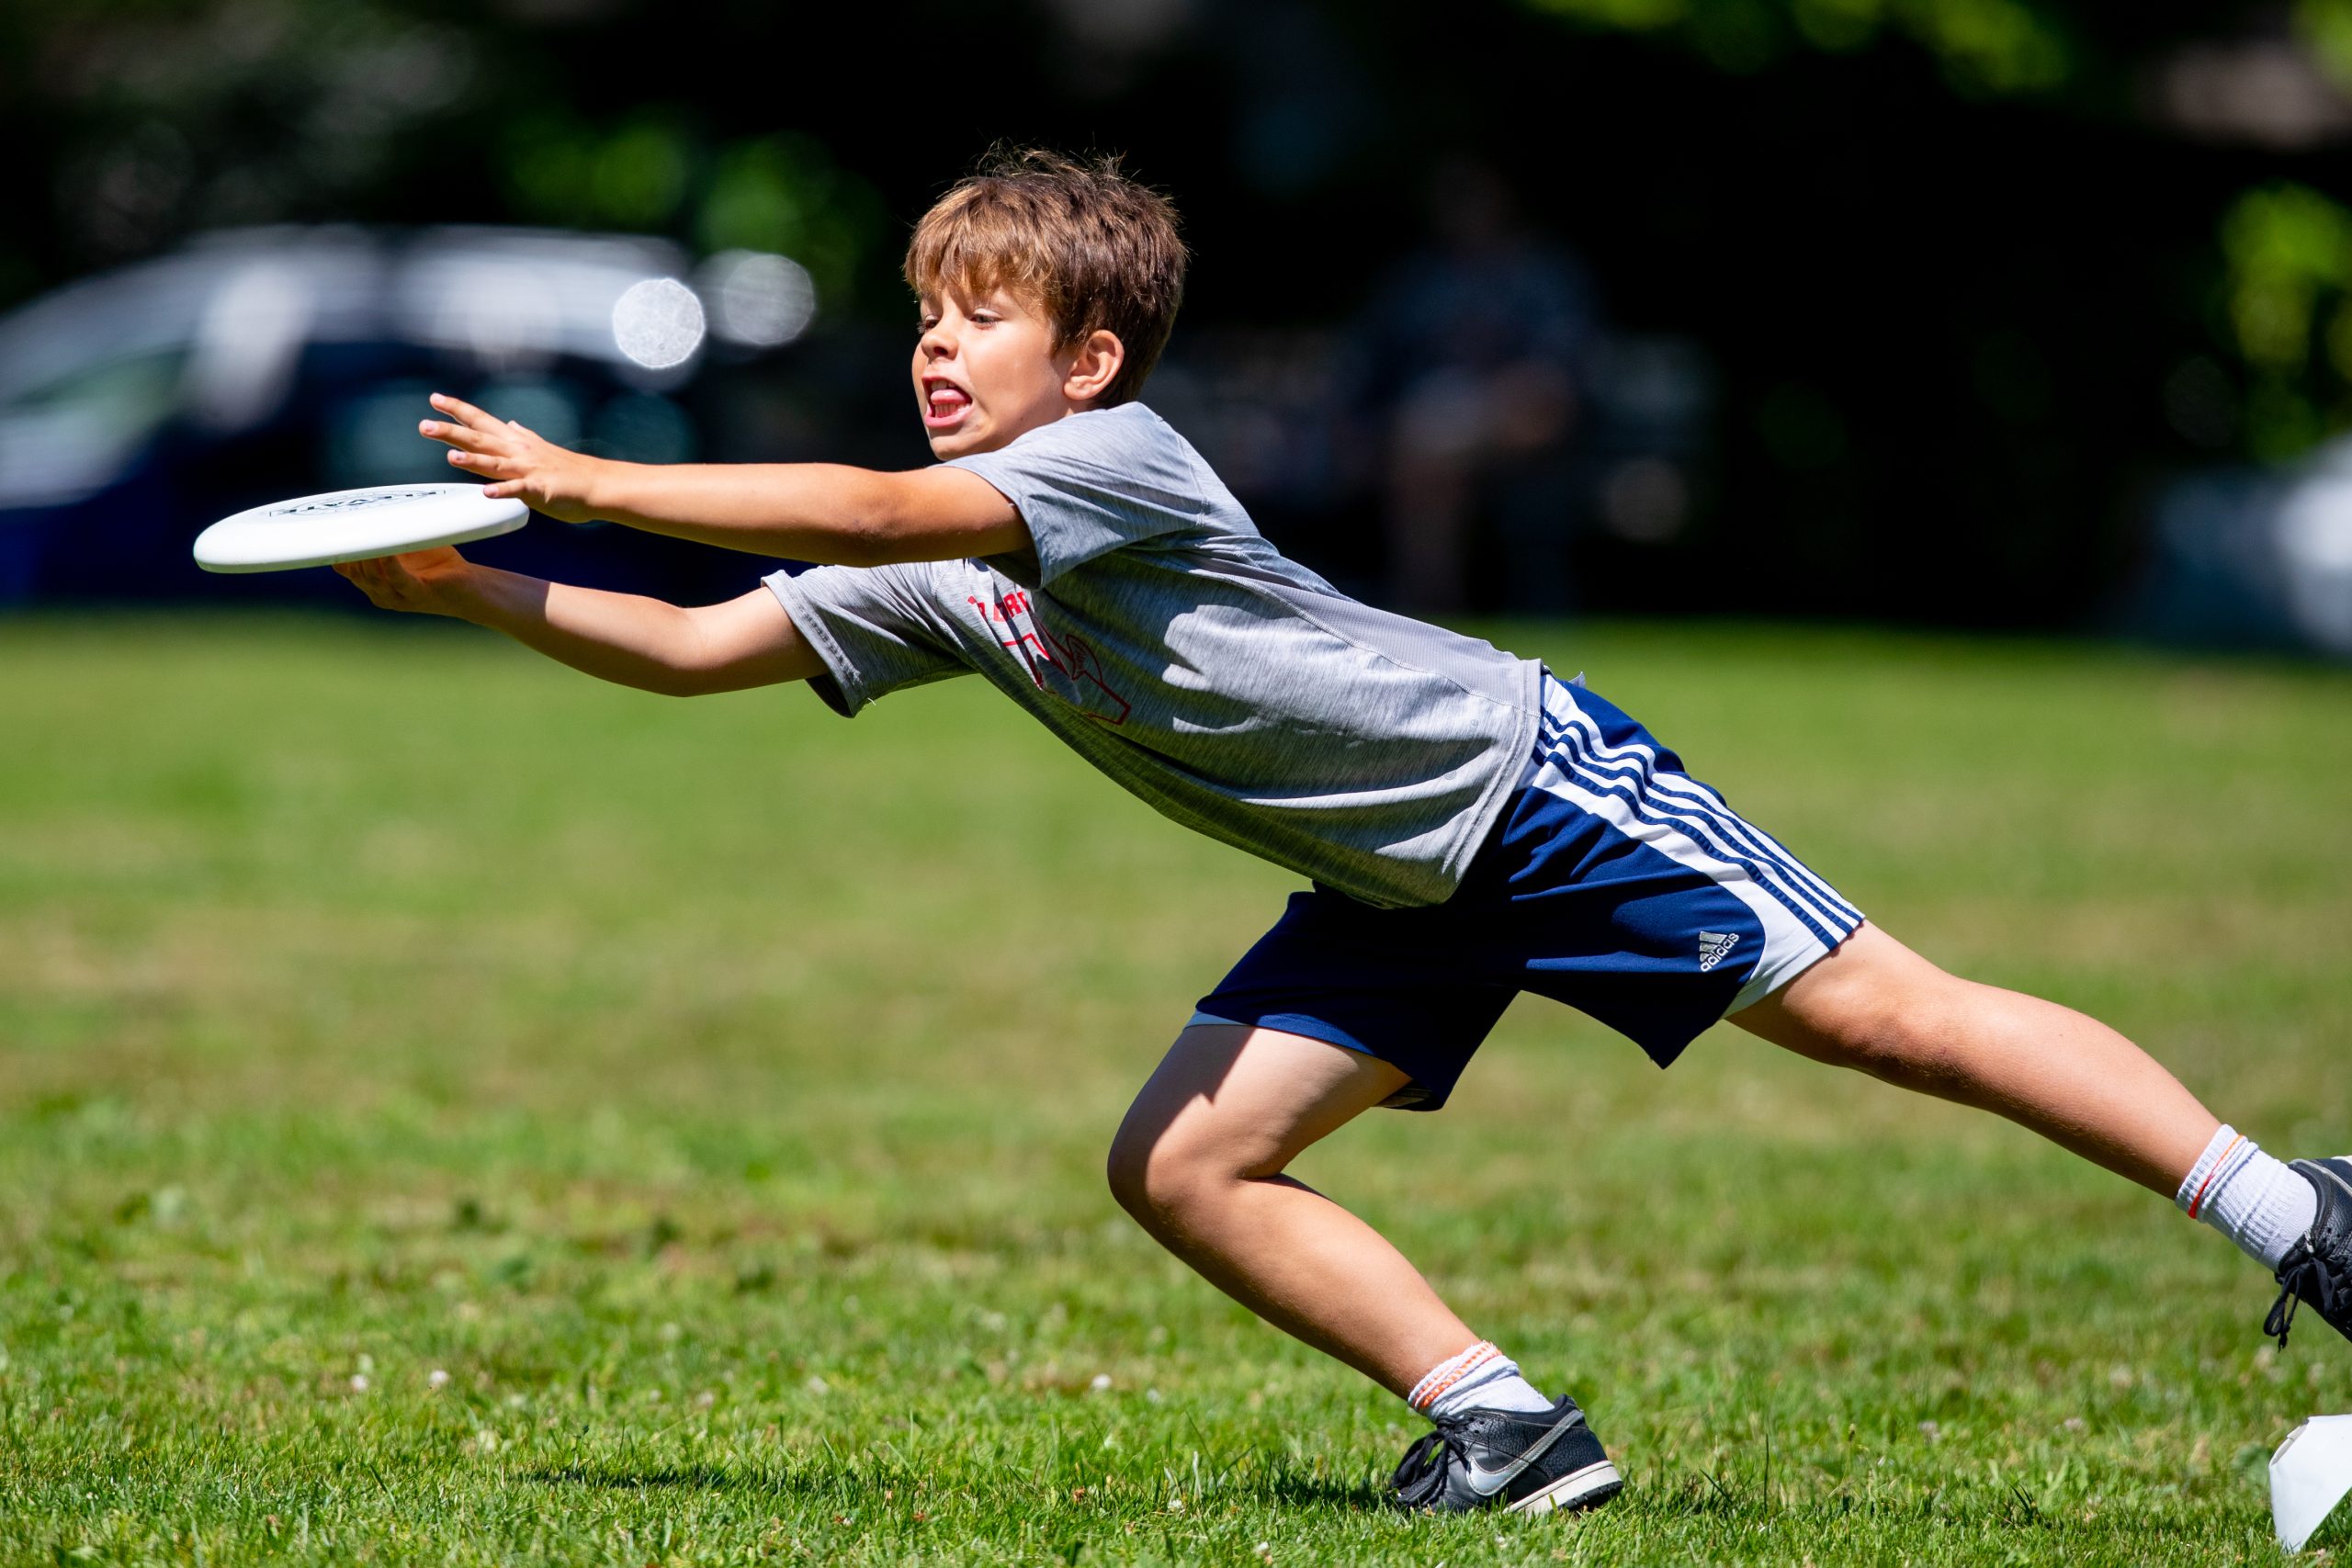 3 Physical Activities to Keep Kids Active